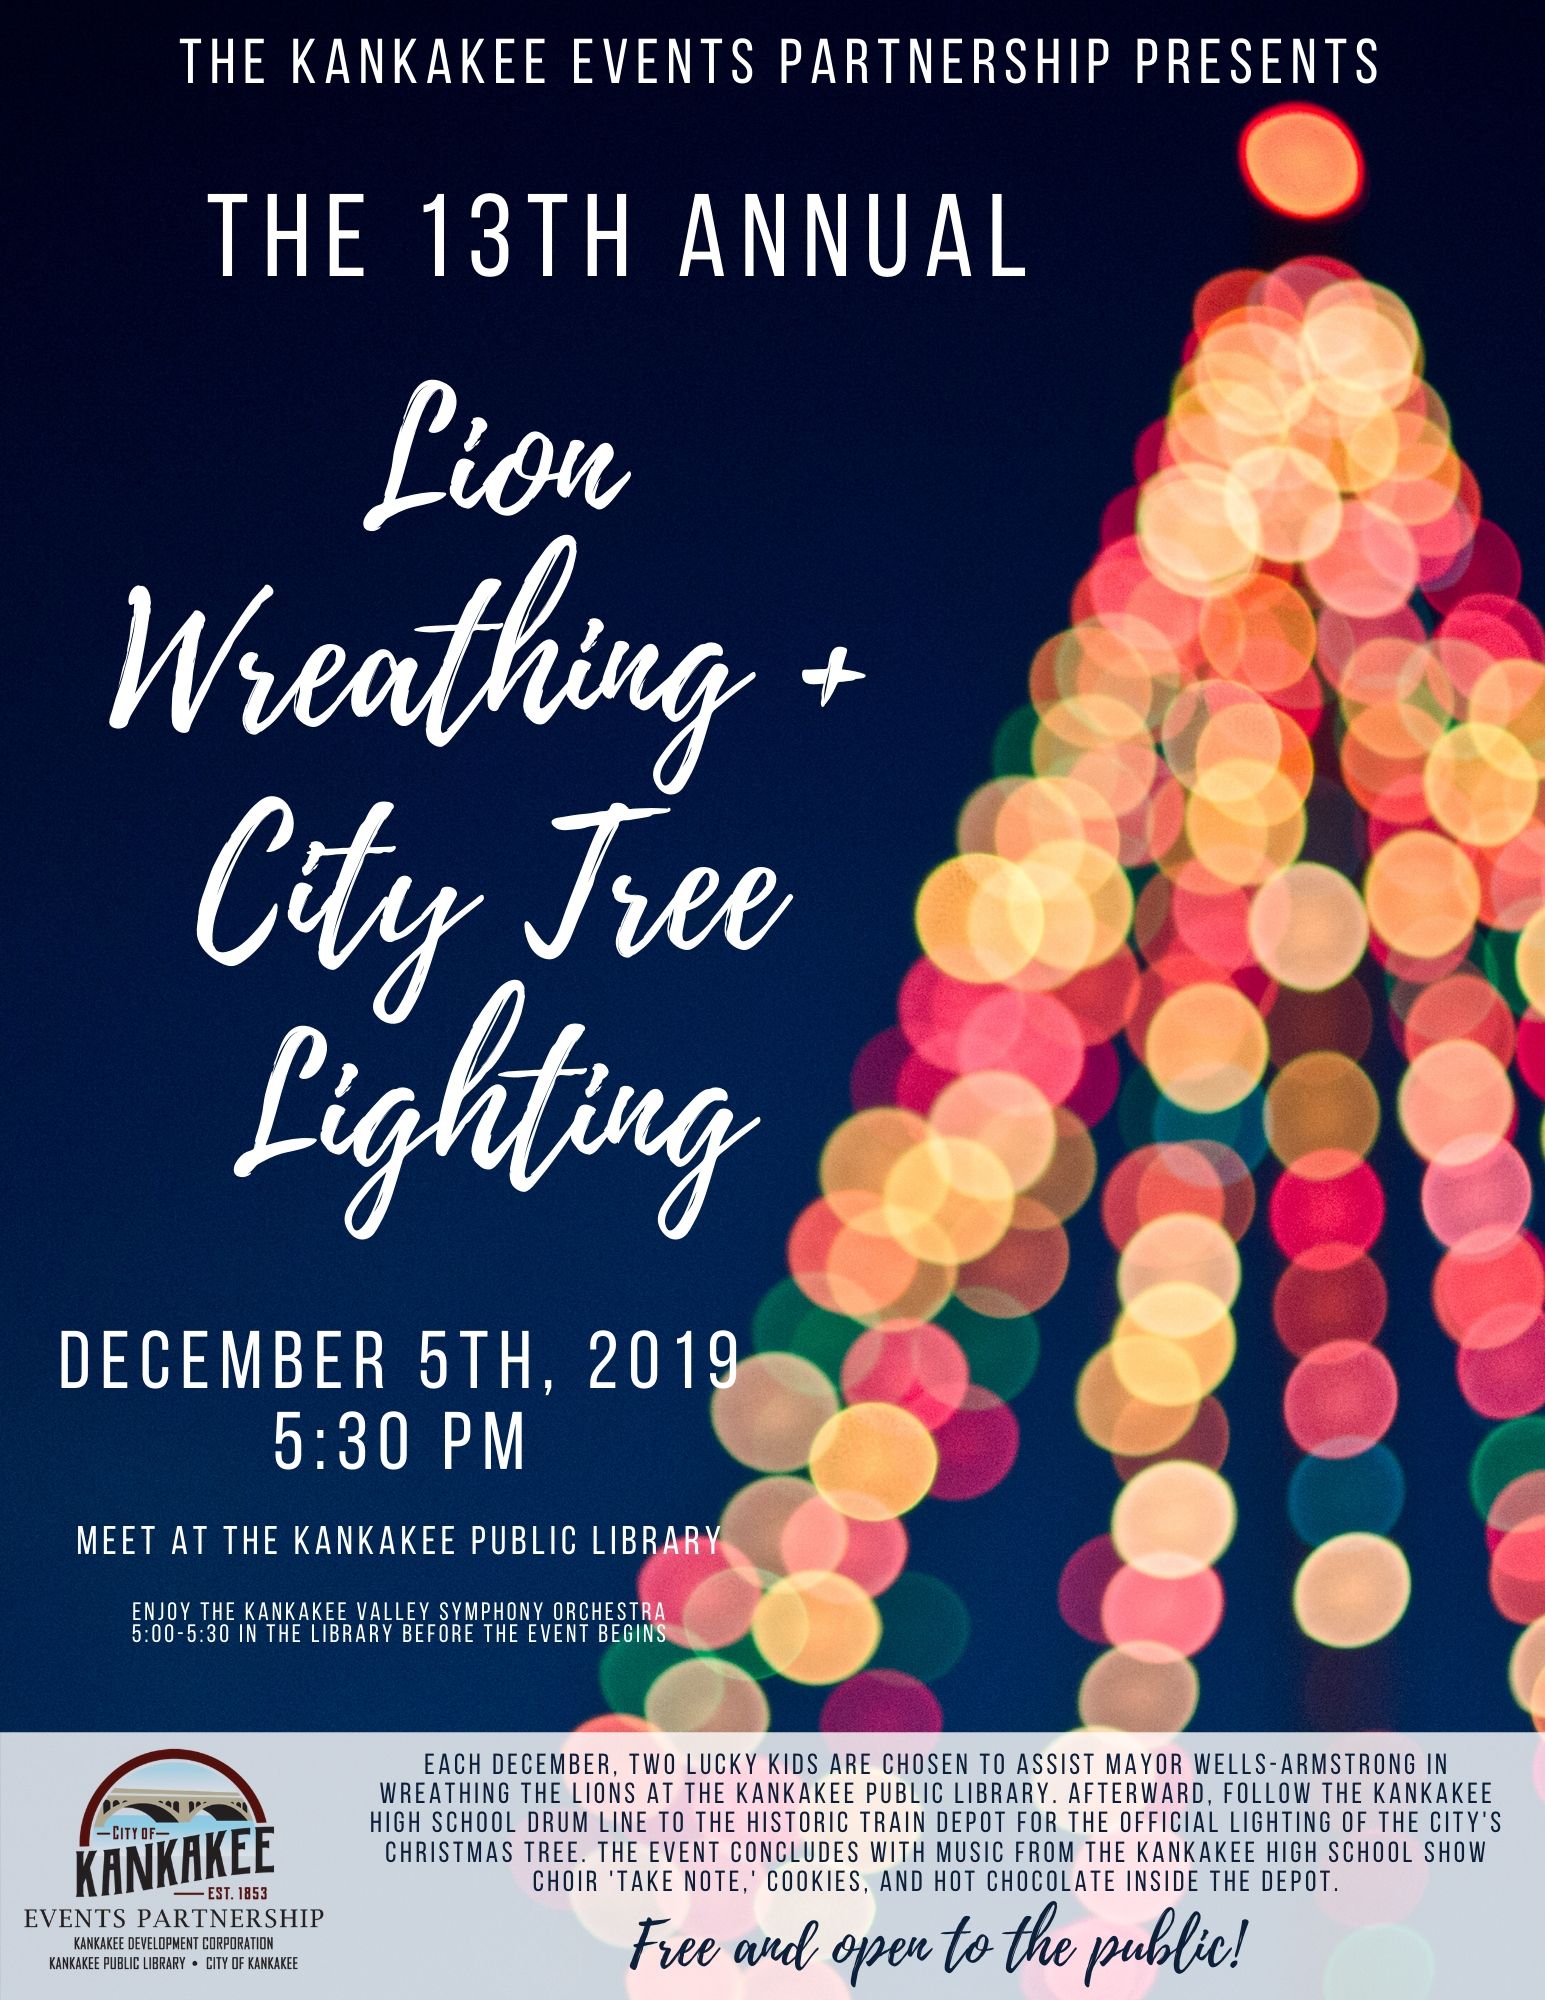 The 13th Annual Lion Wreathing + City Tree Lighting